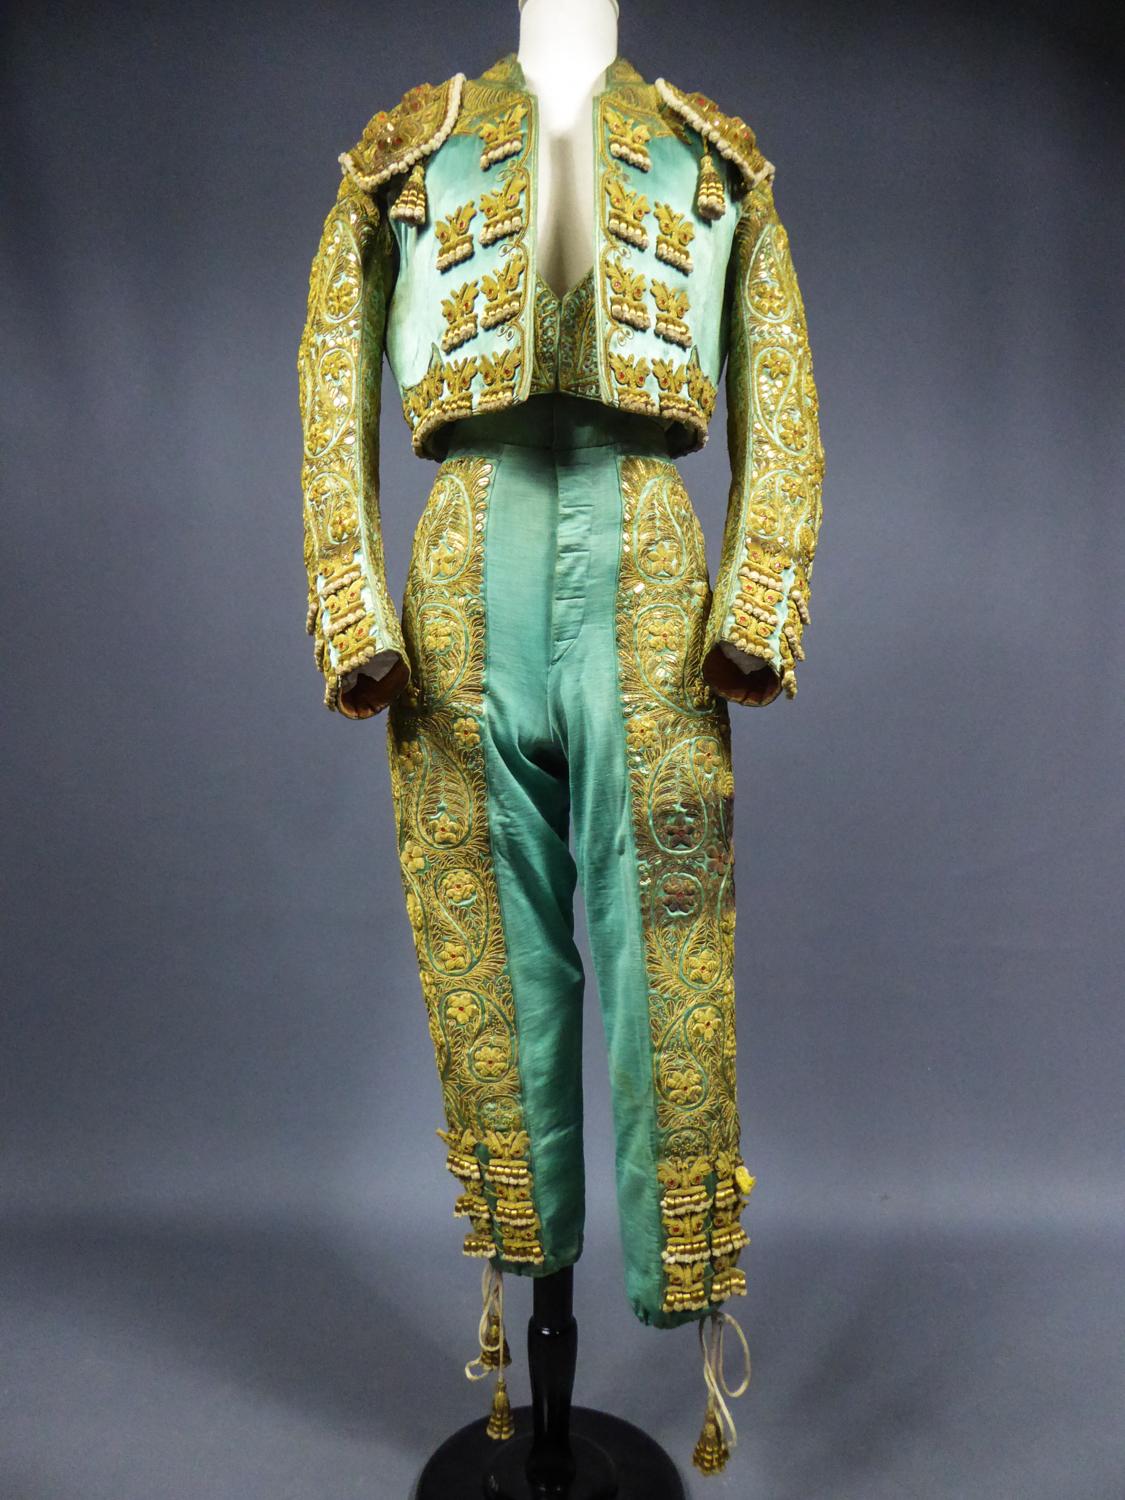 Brown Bullfighter's Outfit Toreador Labelled Manfredi Sevilla 20th Century